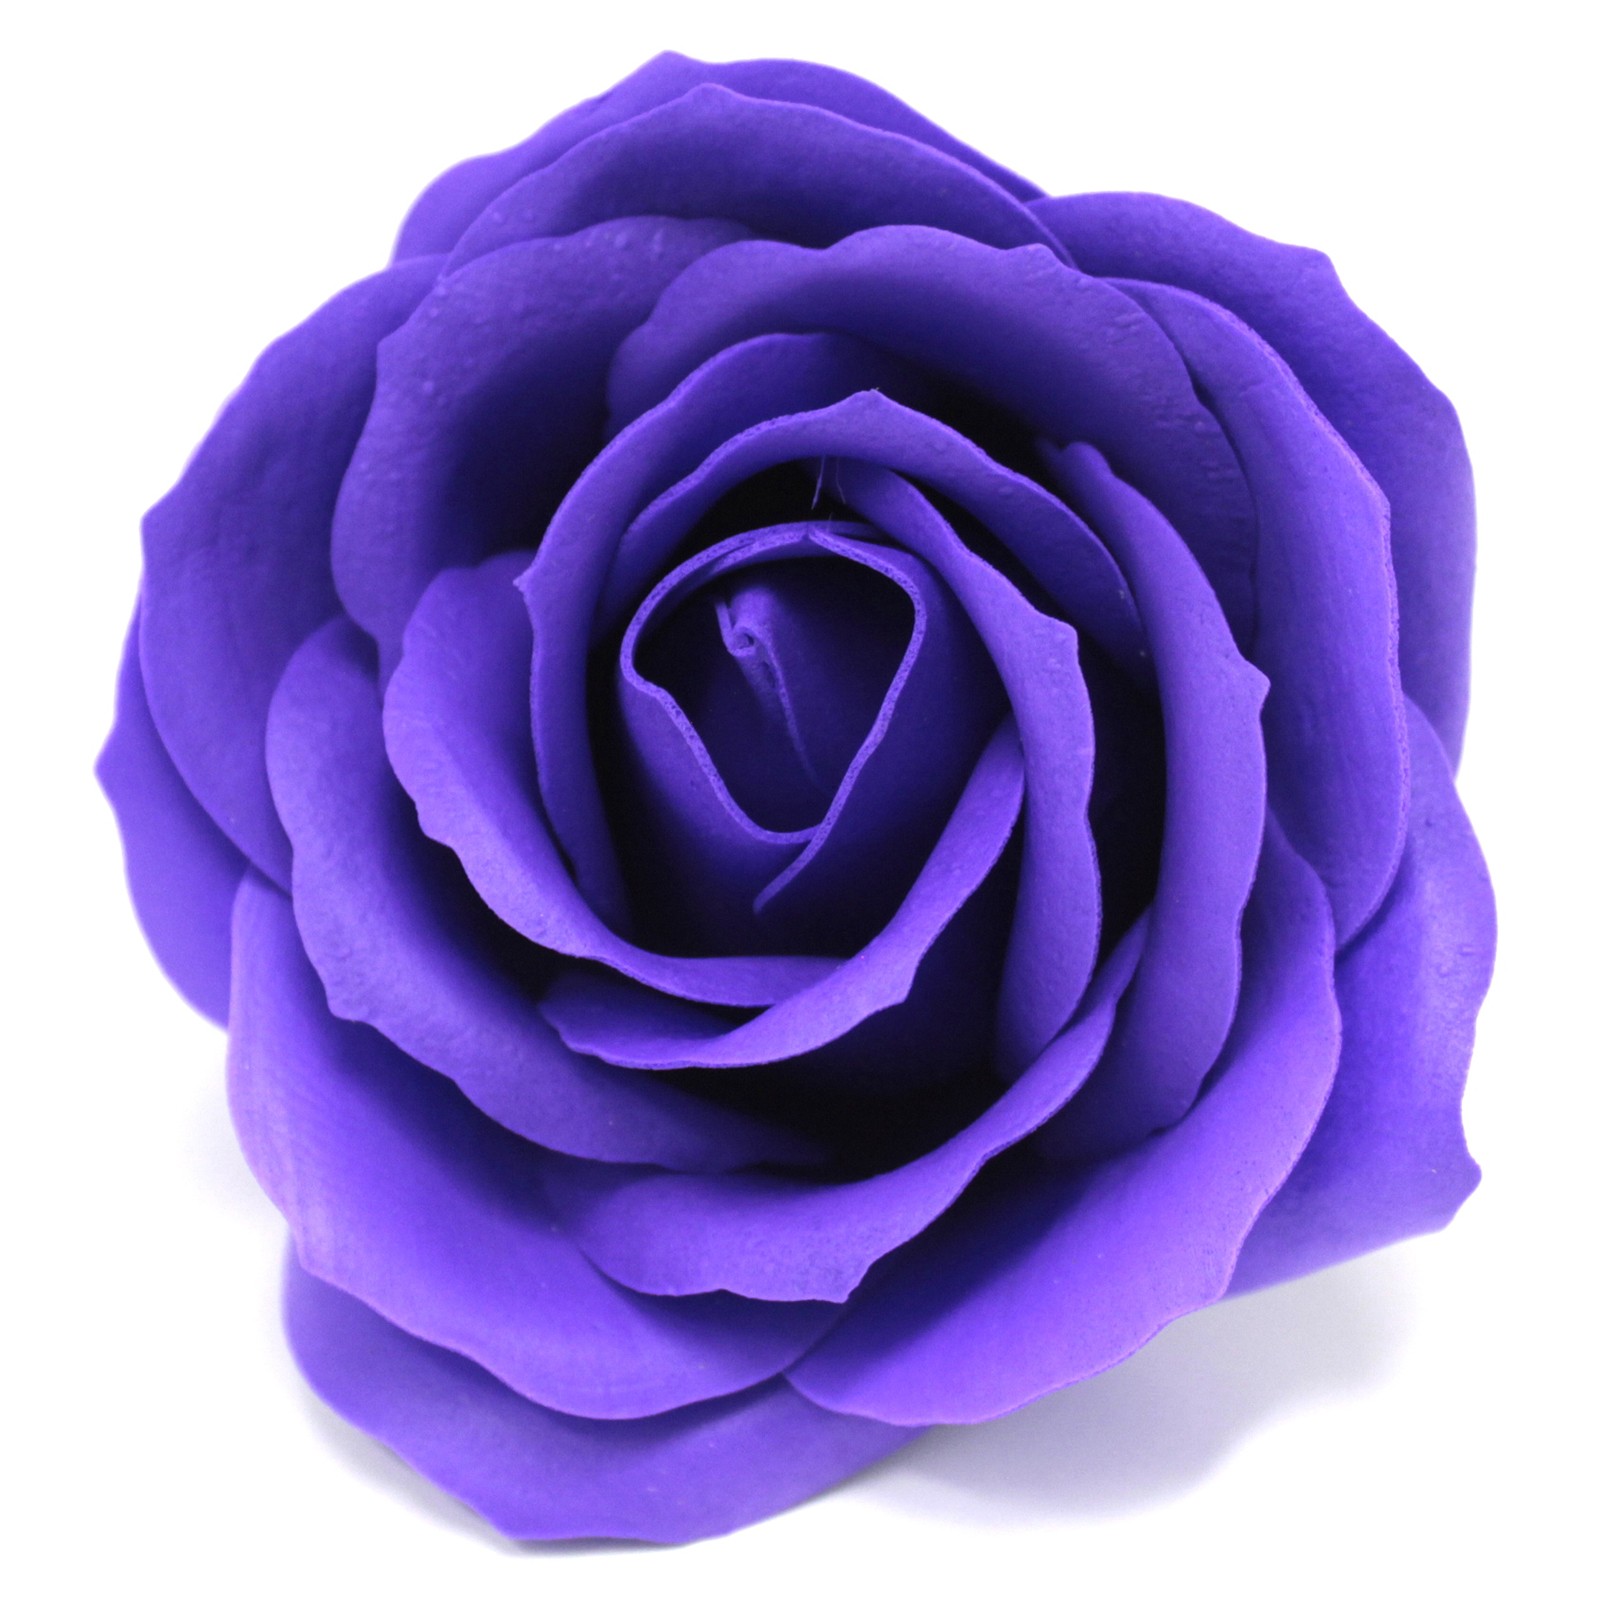 10 x Craft Soap Flowers - Lrg Rose - Violet - Click Image to Close